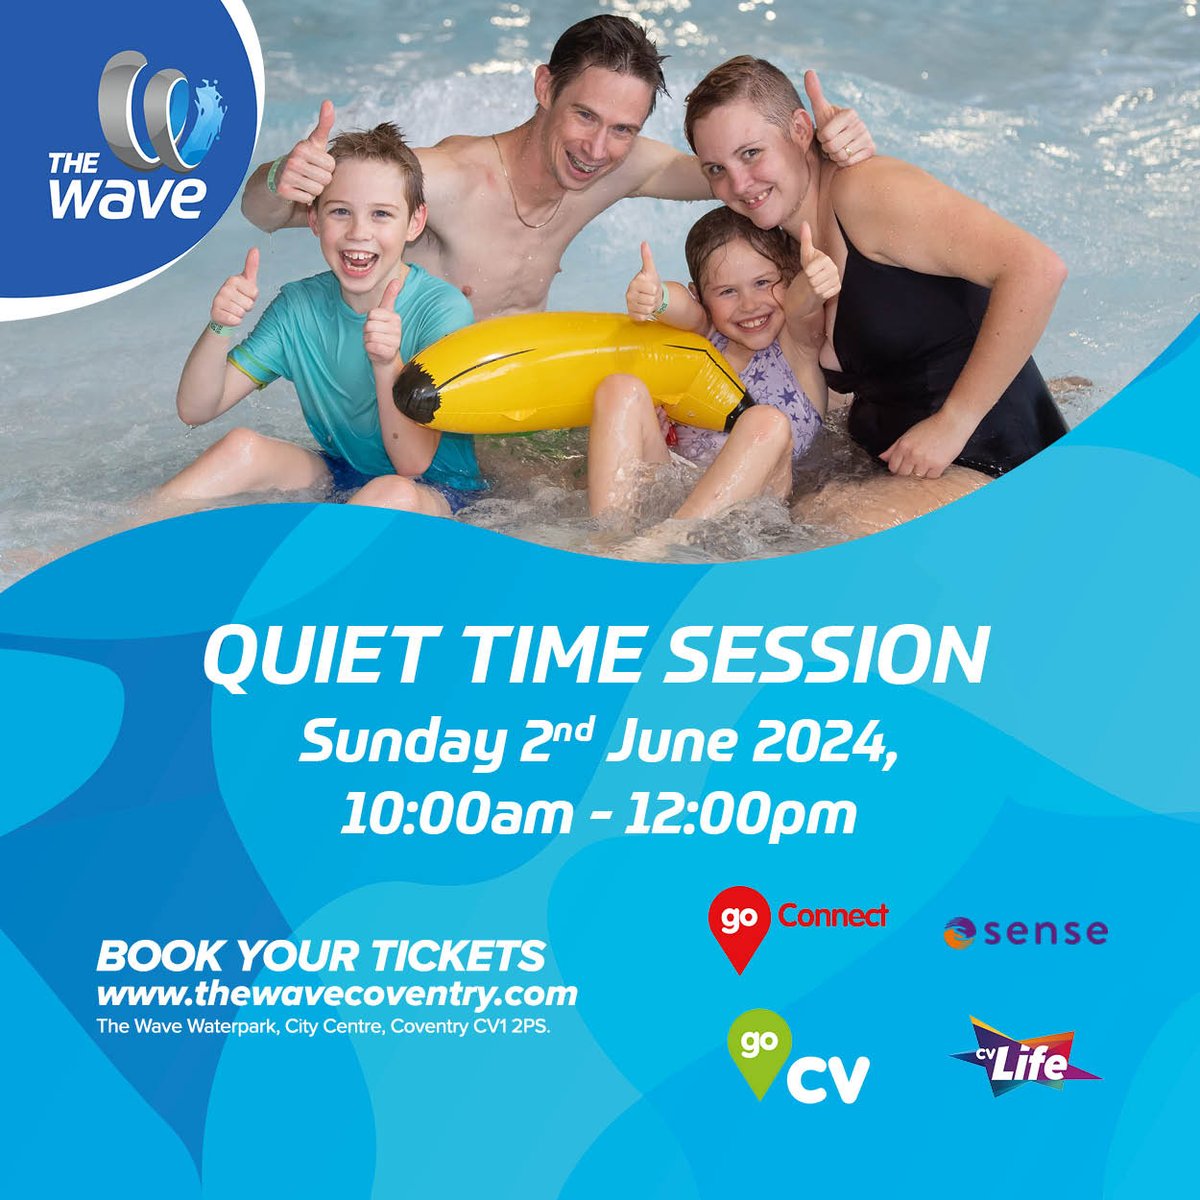 Quiet Time session at @TheWaveCov 🤫 ‼️ Go CV discounts apply ‼️ 💦 Sun 2 June 10am - 12 noon 💦 A calm & relaxing environment with no music, sensory toys in the lazy river as well as accessible changing facilities. 💦 See website ➡️ orlo.uk/hEgkt @cvlifecommunity